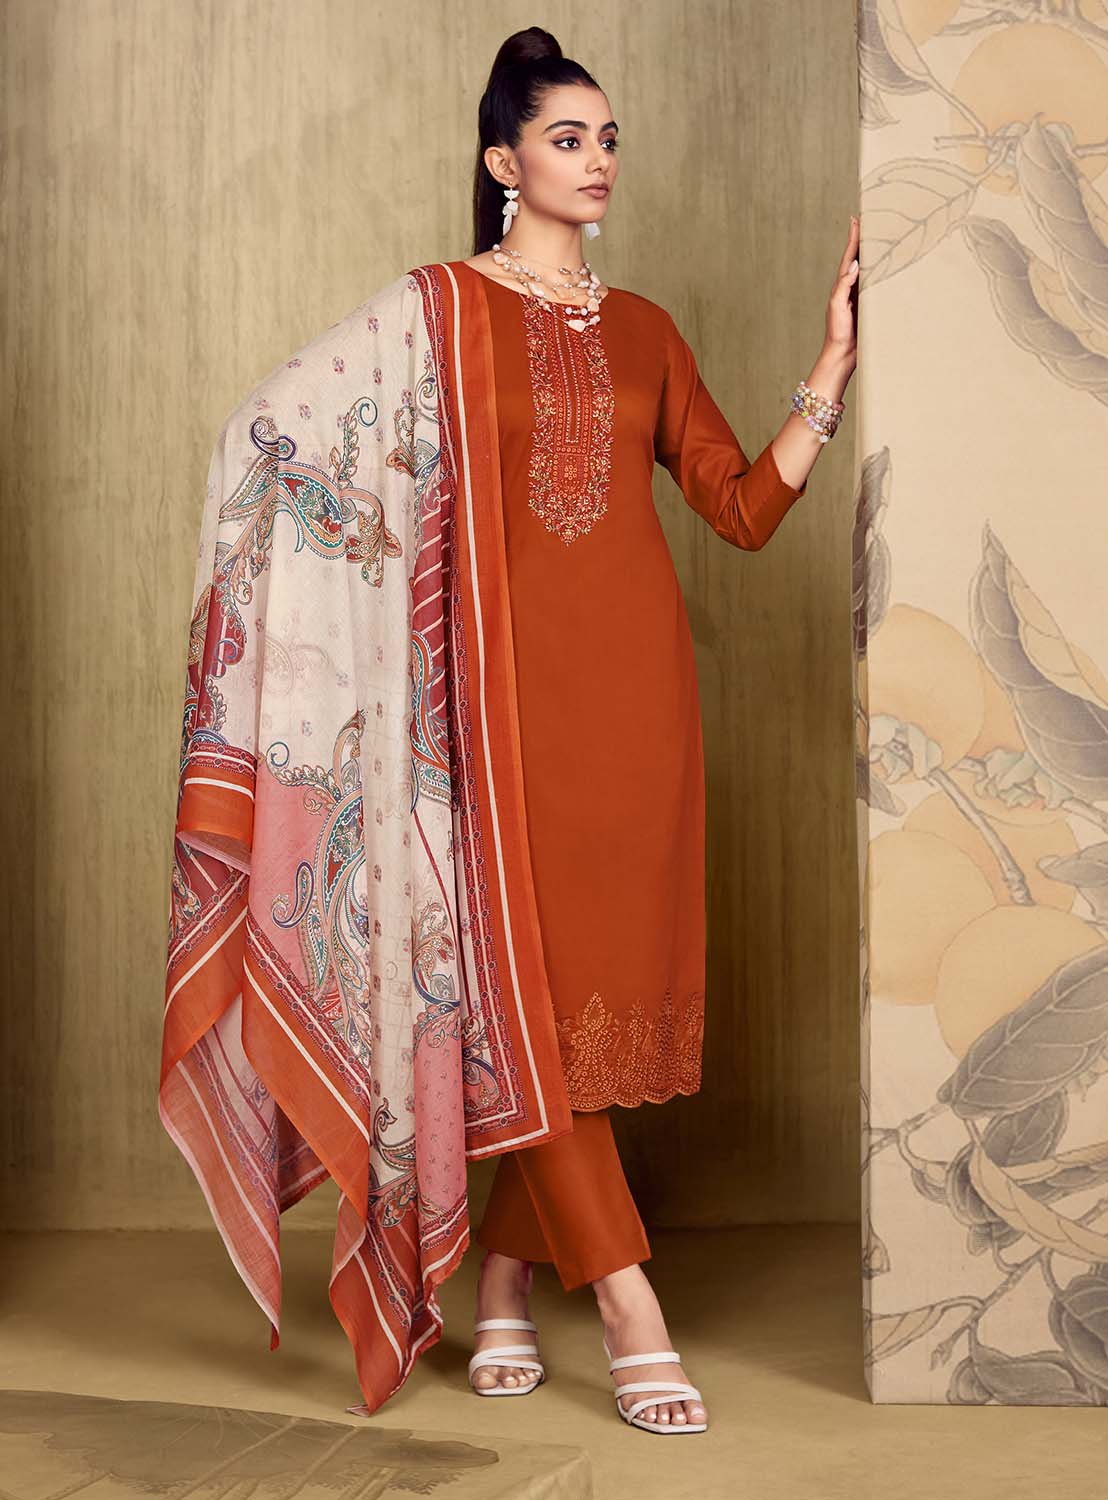 Belliza Unstitched Orange Cotton Suit Dress Material with Embroidery Belliza